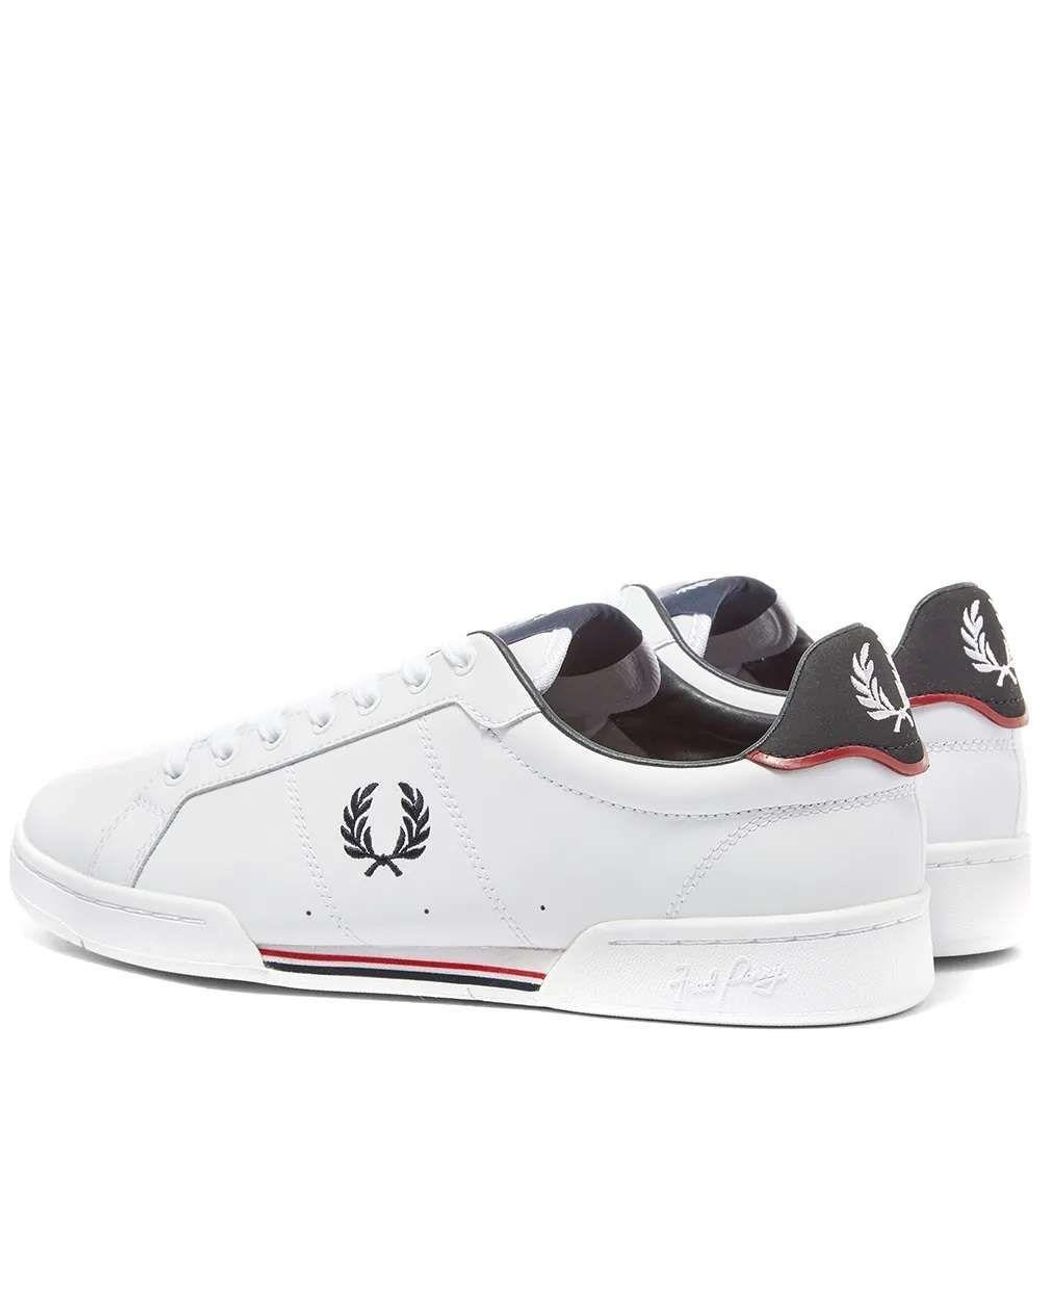 Fred Perry White And Navy Leather Sneakers for Men - Save 13% - Lyst